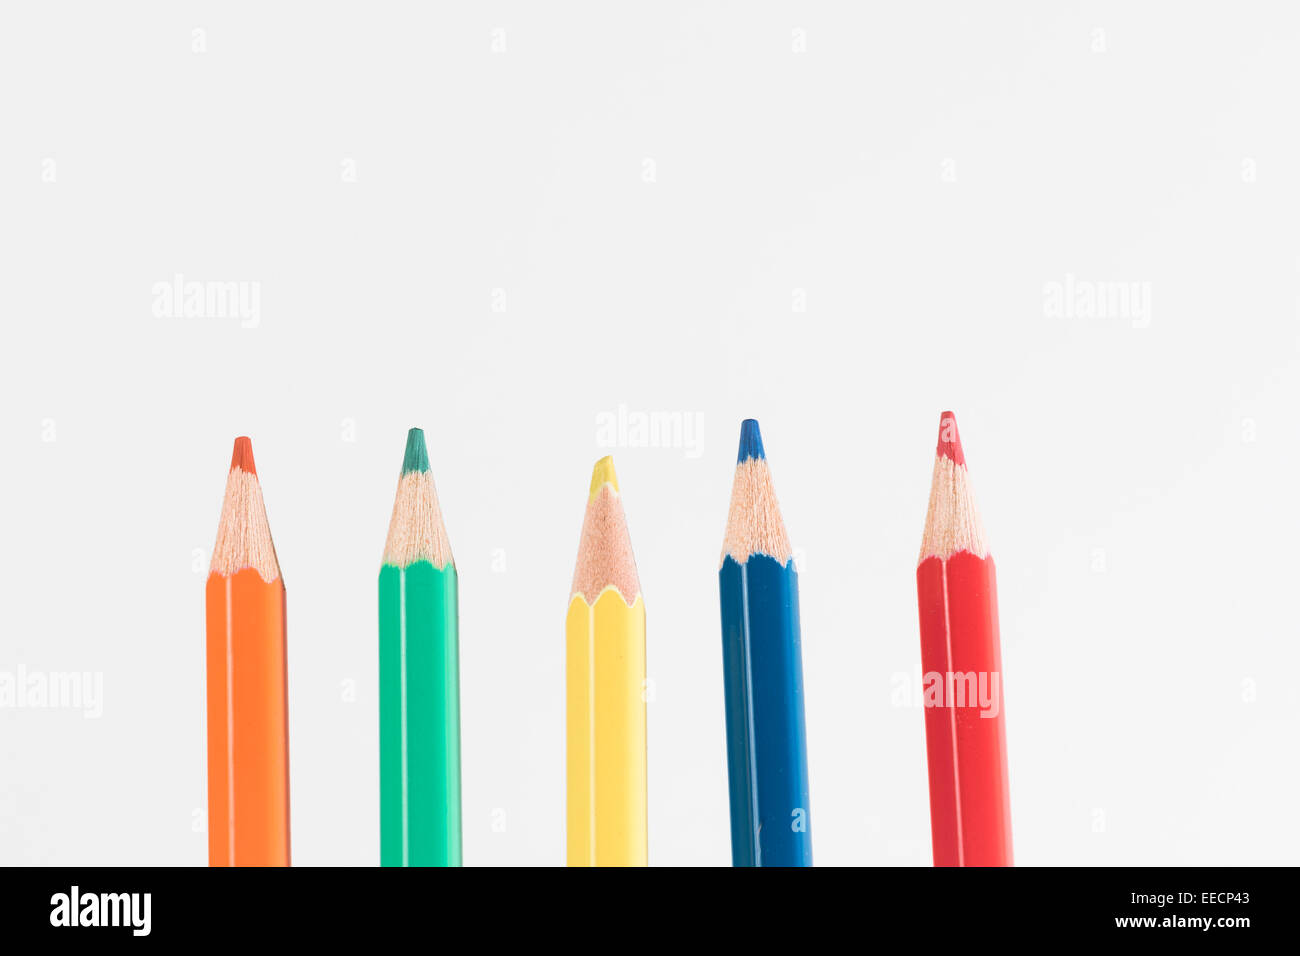 A group of colored pencils, conceptual image of a human creative team following leadership, learning, sharing ideas Stock Photo